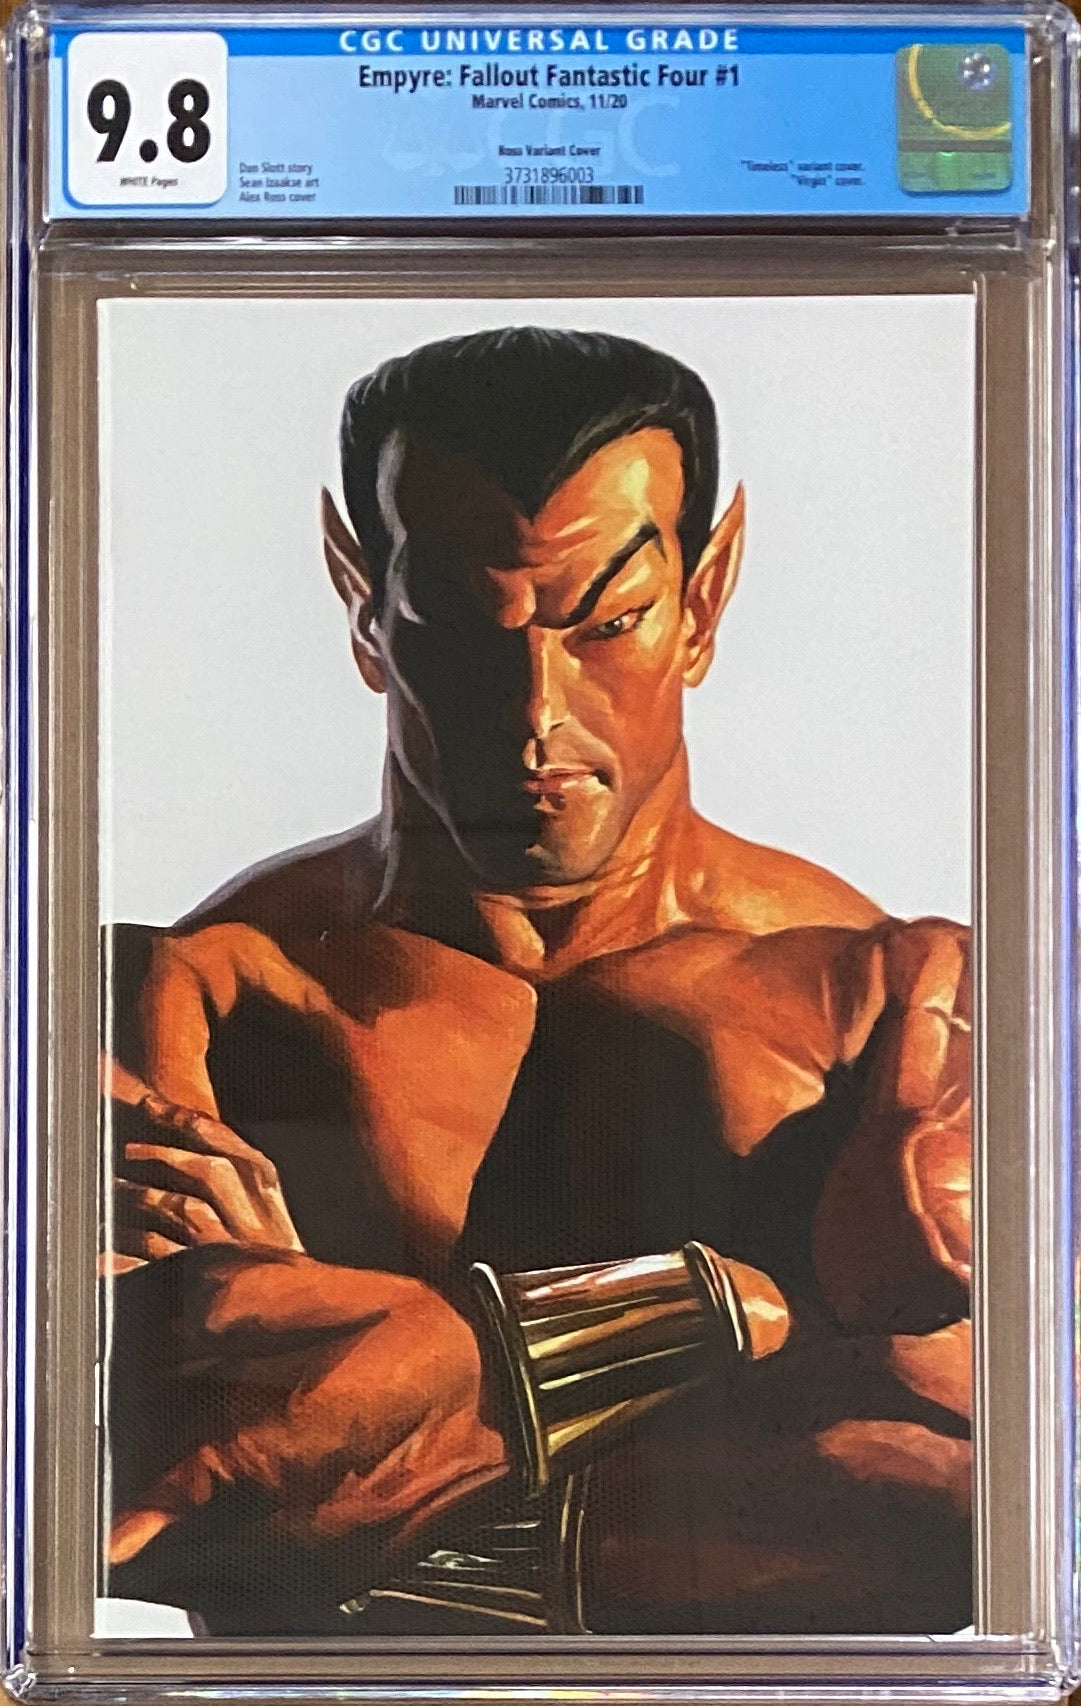 Empyre Fallout: Fantastic Four #1 Alex Ross Sub-Mariner "Timeless" Variant CGC 9.8